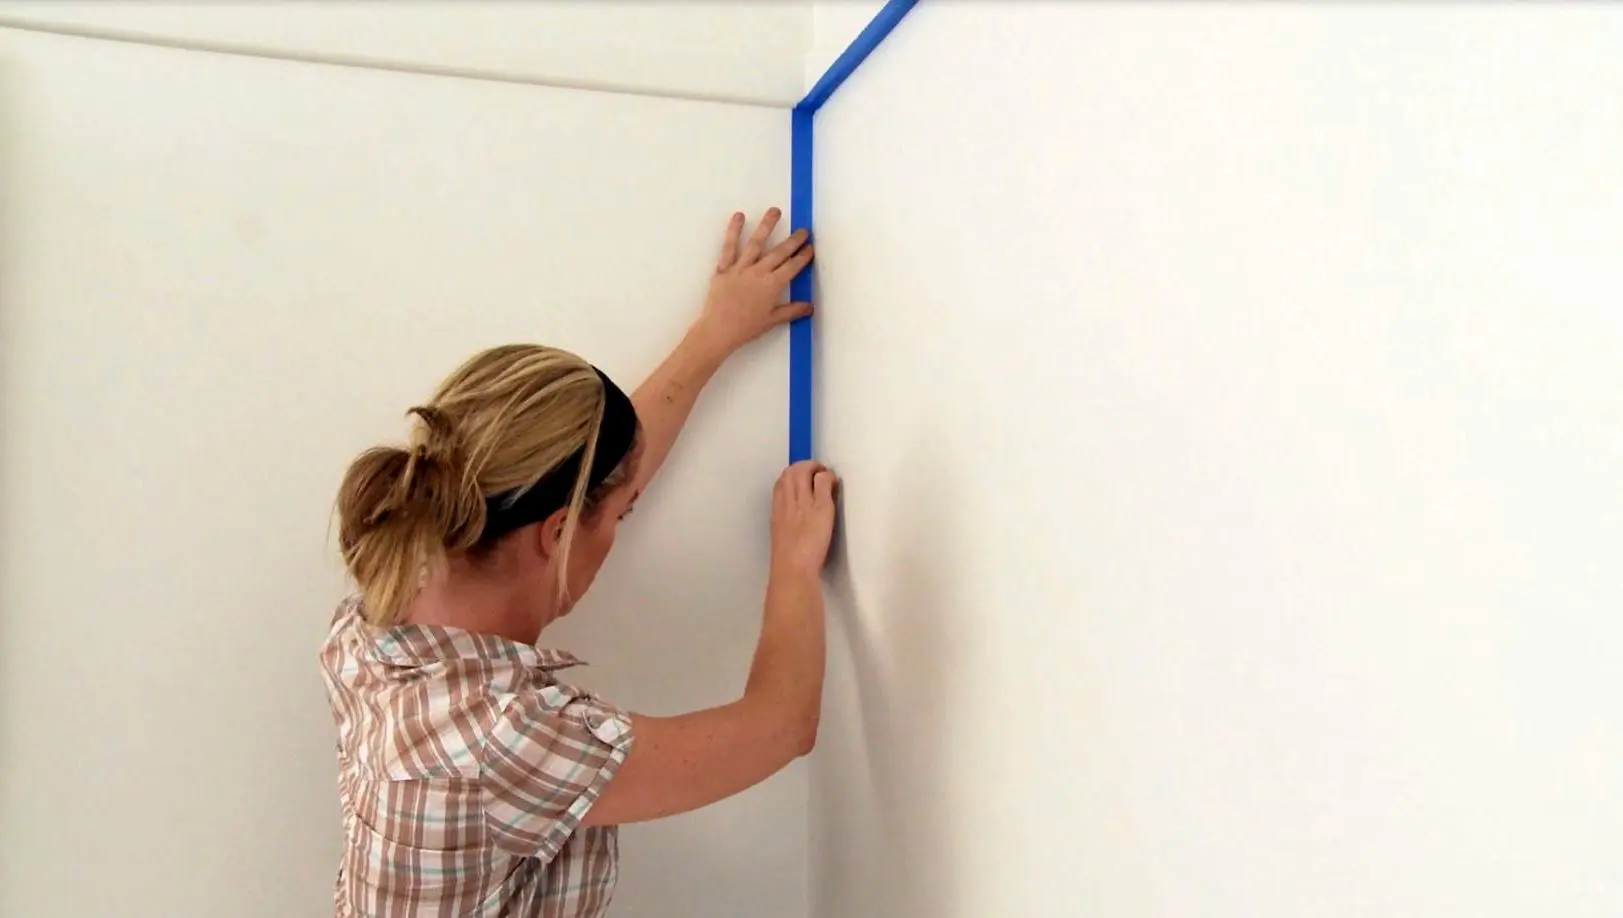 Woman using masking tape to protect area in preparation for painting